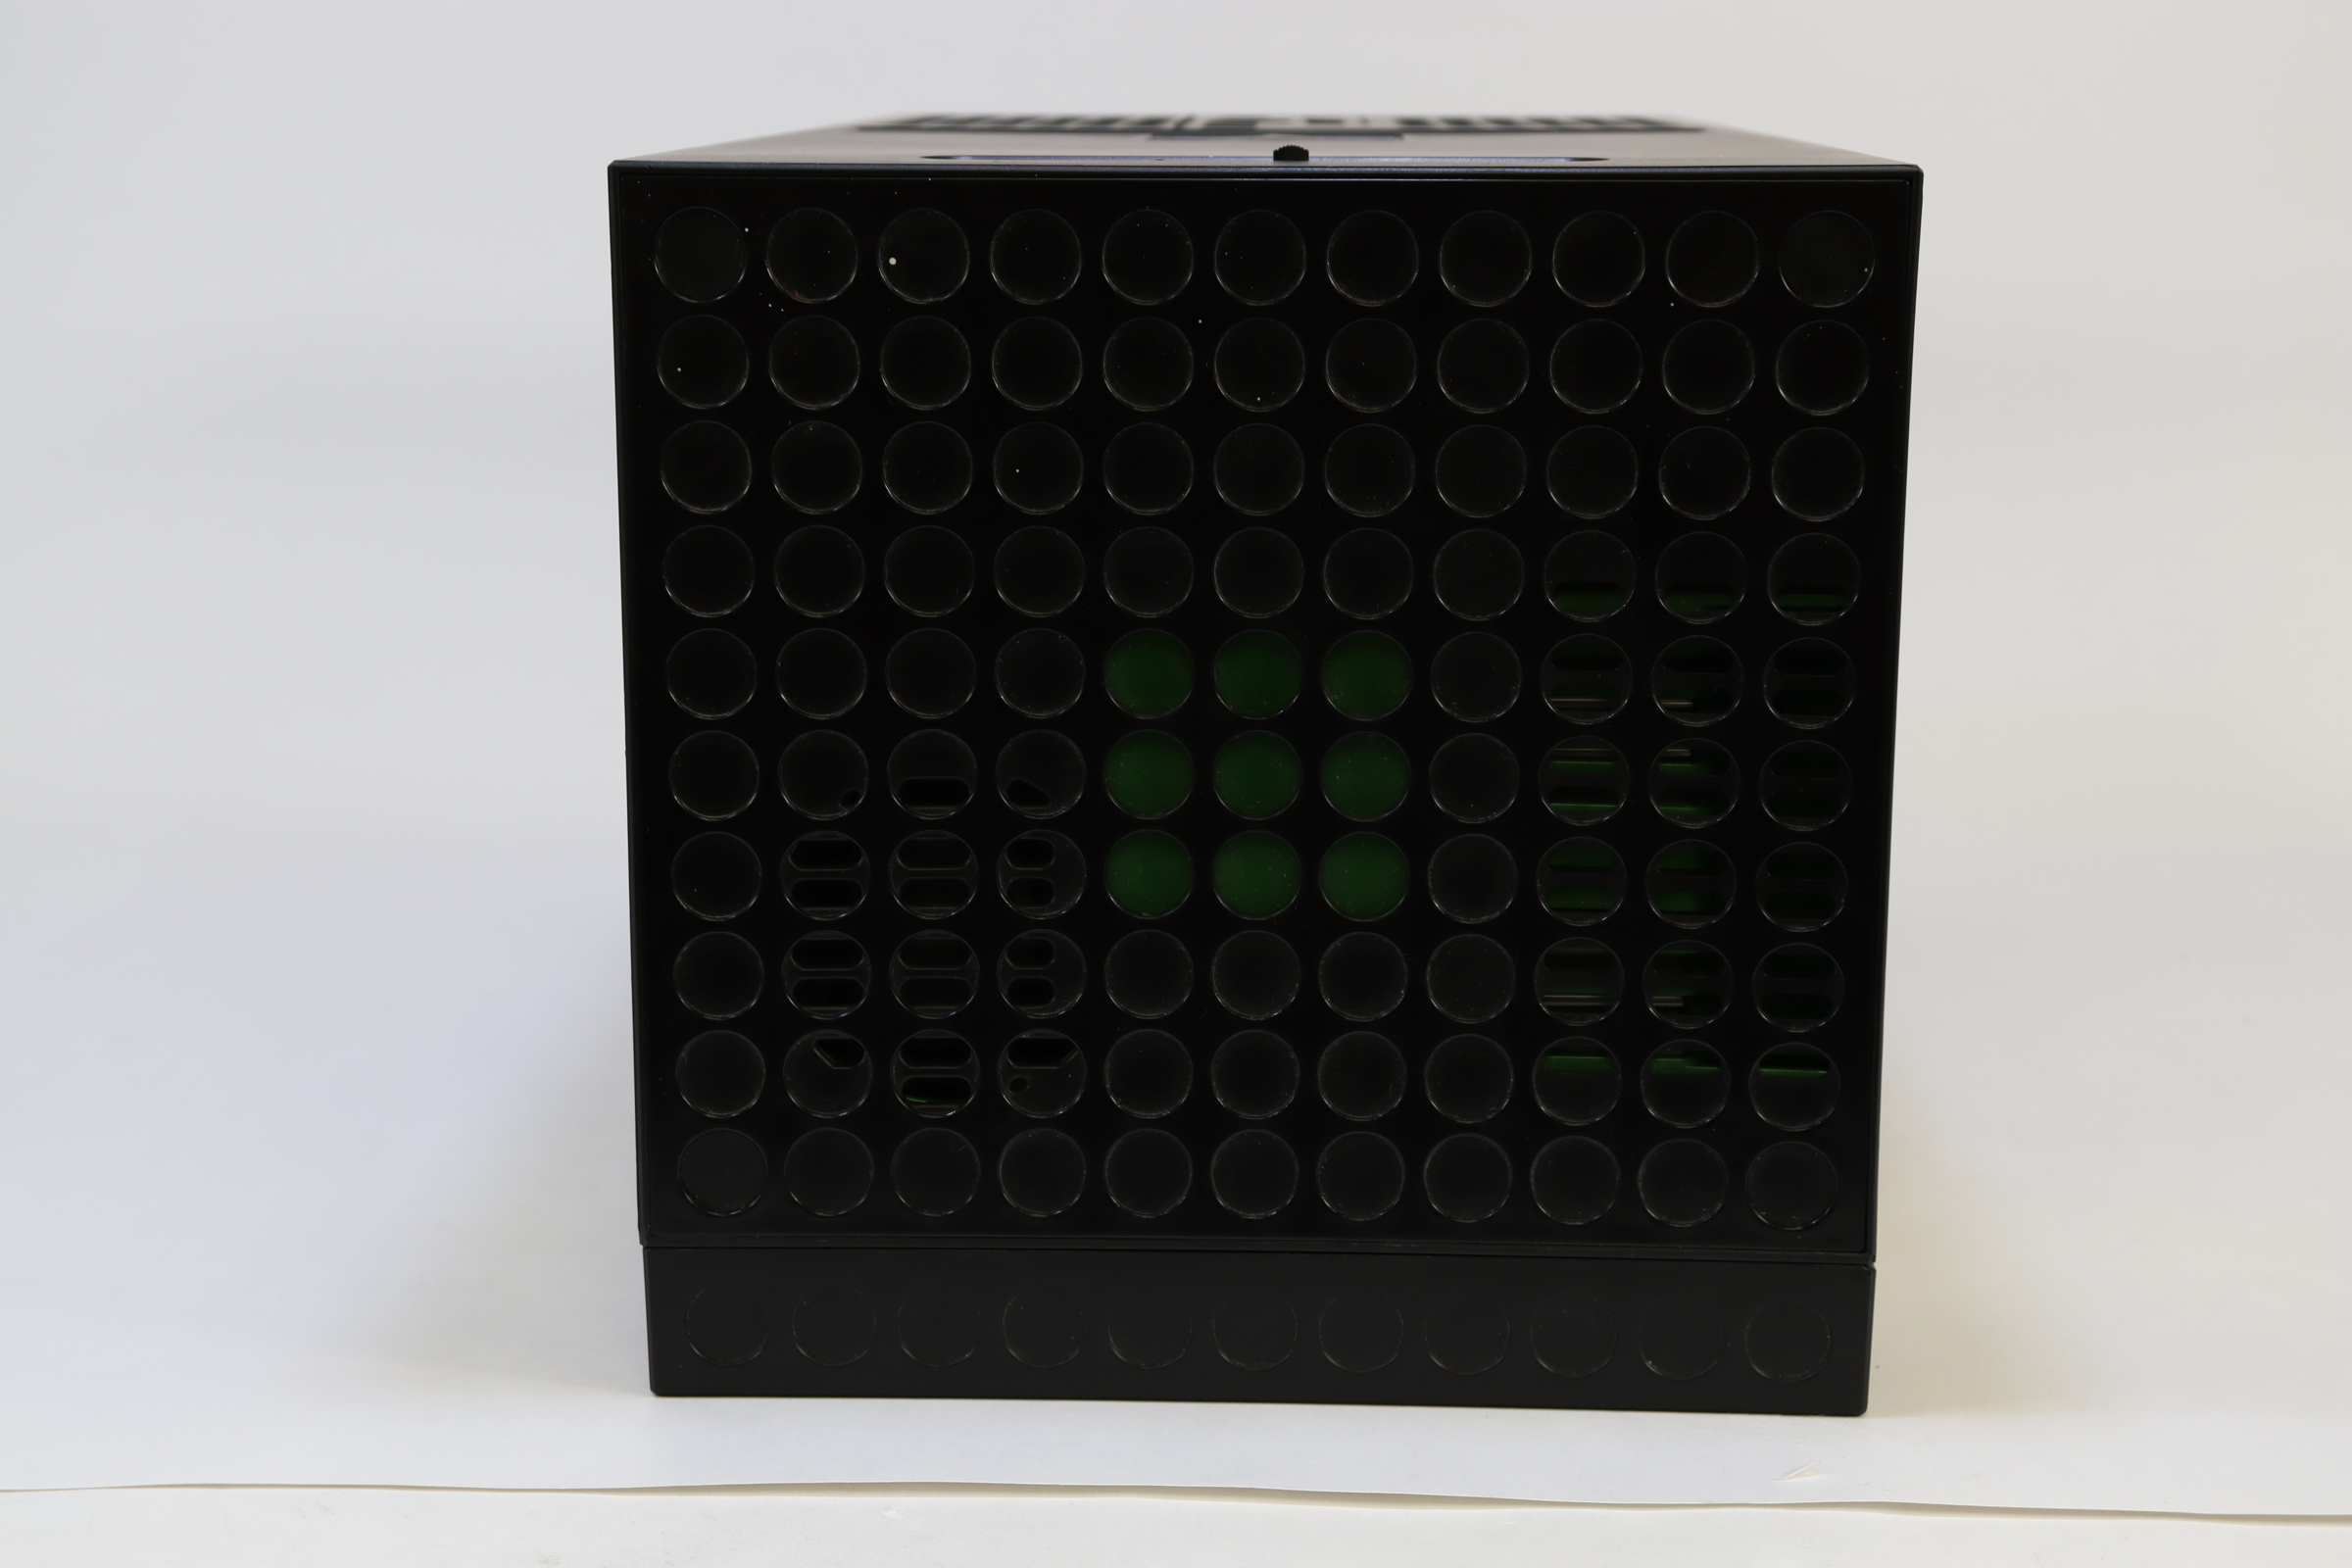 Minecraft Creeper Head Thermoelectric Cooler – Ukonic